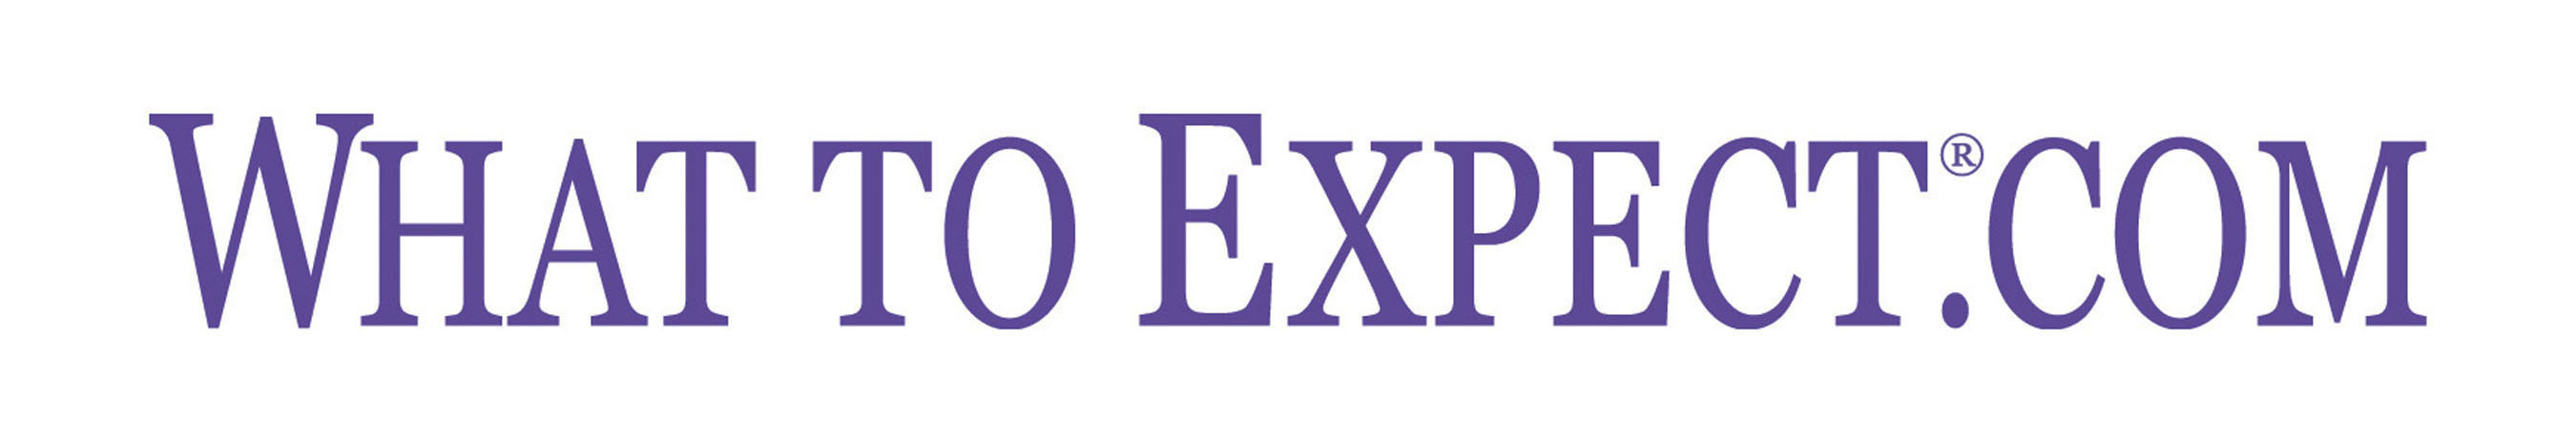 WhatToExpect.com, published by Everyday Health, Inc., is the online home to Heidi Murkoff's globally recognized parenting and pregnancy brand, What to Expect(R), offering original content and innovative tools for pregnancy and parenting every step of the way. Heidi Murkoff, author of the bestselling What to Expect(R) series of pregnancy and parenting books, has helped guide more than 40 million families worldwide from conception through the toddler years and beyond. According to USA Today, this parenting book, known as the "Bible" to moms across the world, is bought by 93 percent of all expecting mothers who buy a guide.